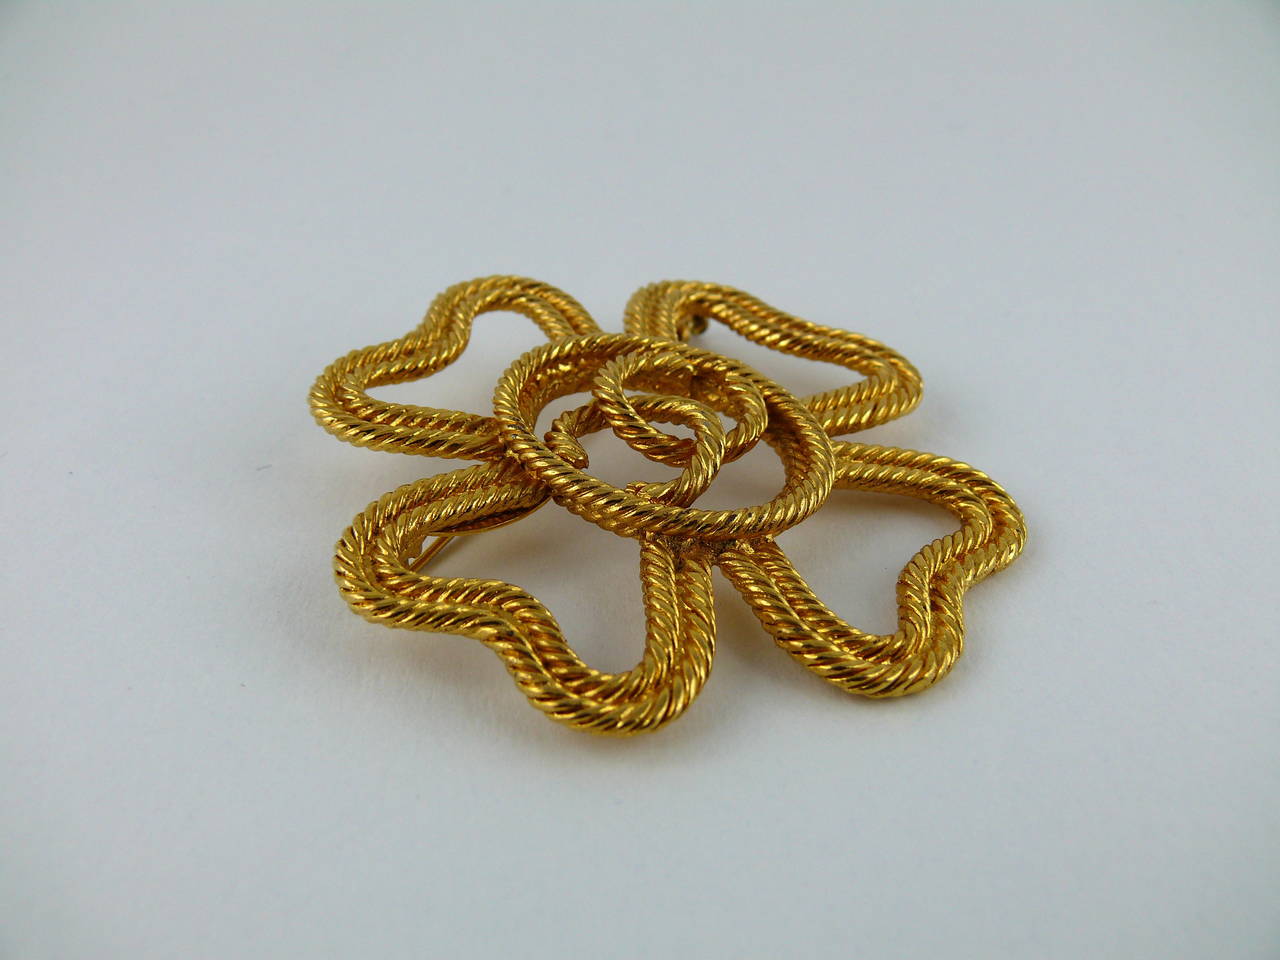 Chanel vintage gold tone clover rope-like brooch featuring CC monogram.

Collection year : 1993.

Marked Chanel 2 8 Made in France.

Indicative measurements : height aprox. 5.4 cm (2.13 inches) / width approx. 5.2 cm (2.05 inches).

JEWELRY